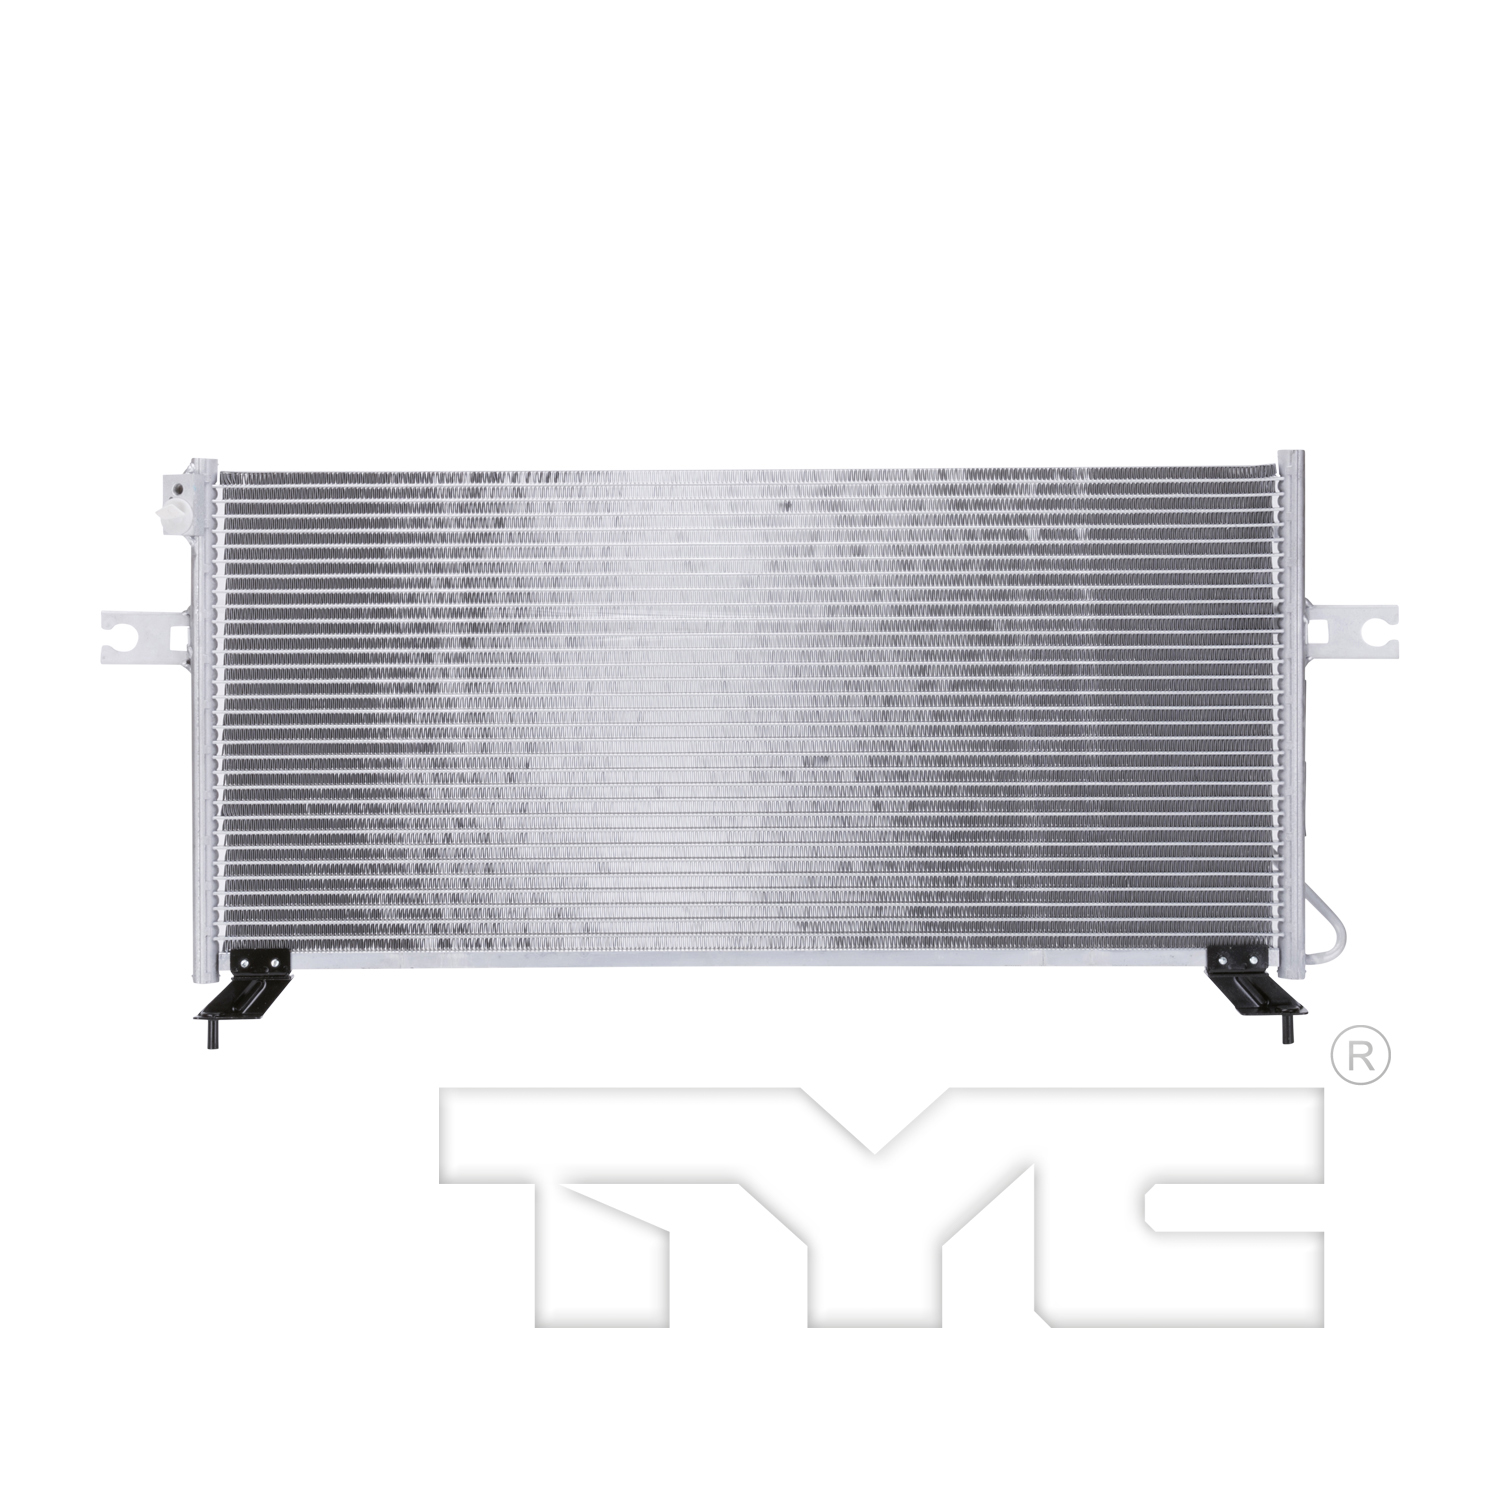 Aftermarket AC CONDENSERS for NISSAN - FRONTIER, FRONTIER,98-01,Air conditioning condenser